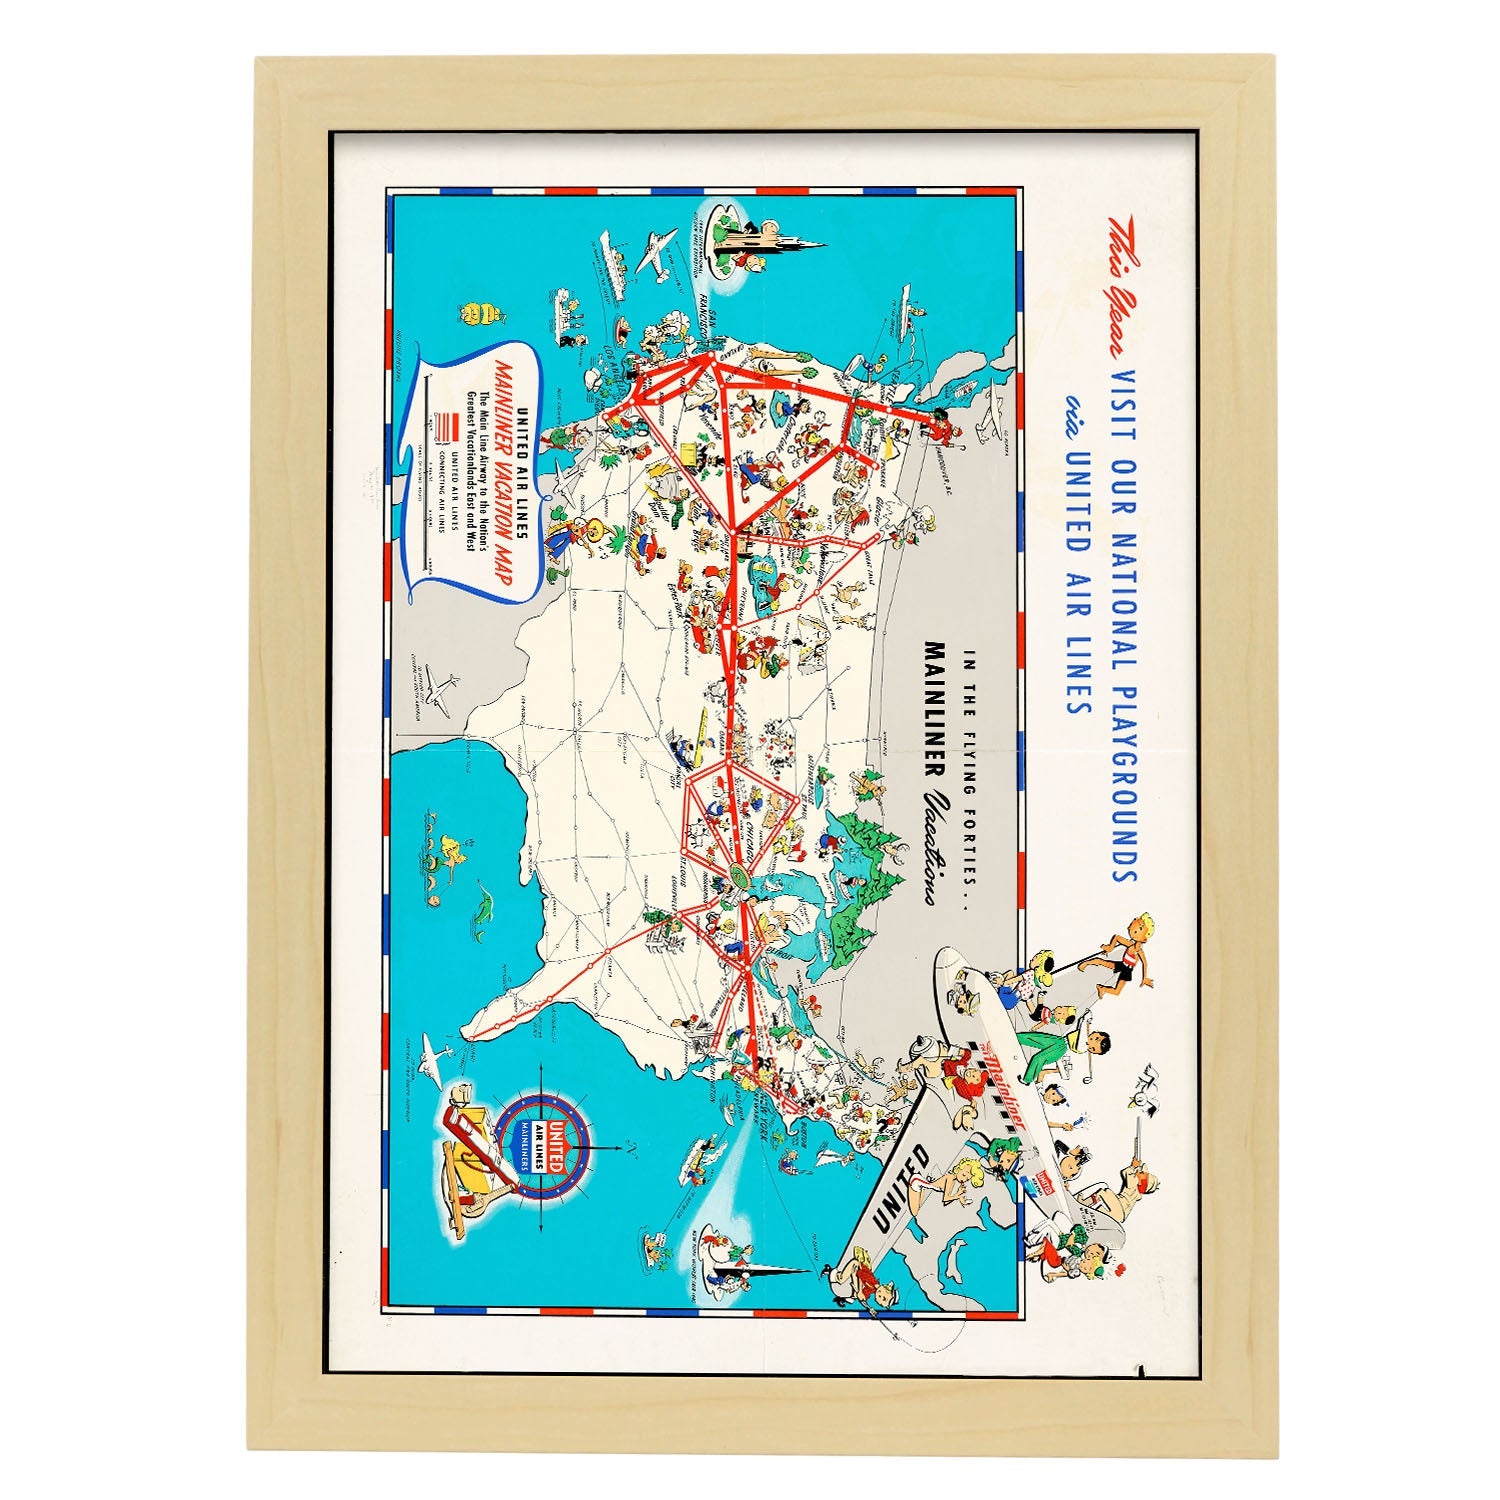 United_Air_Lines_mainliner_vacation_map_-_the_main_line_airway_to_the_nations_greatesst_vacationlands_east_and_west-Artwork-Nacnic-A3-Marco Madera clara-Nacnic Estudio SL